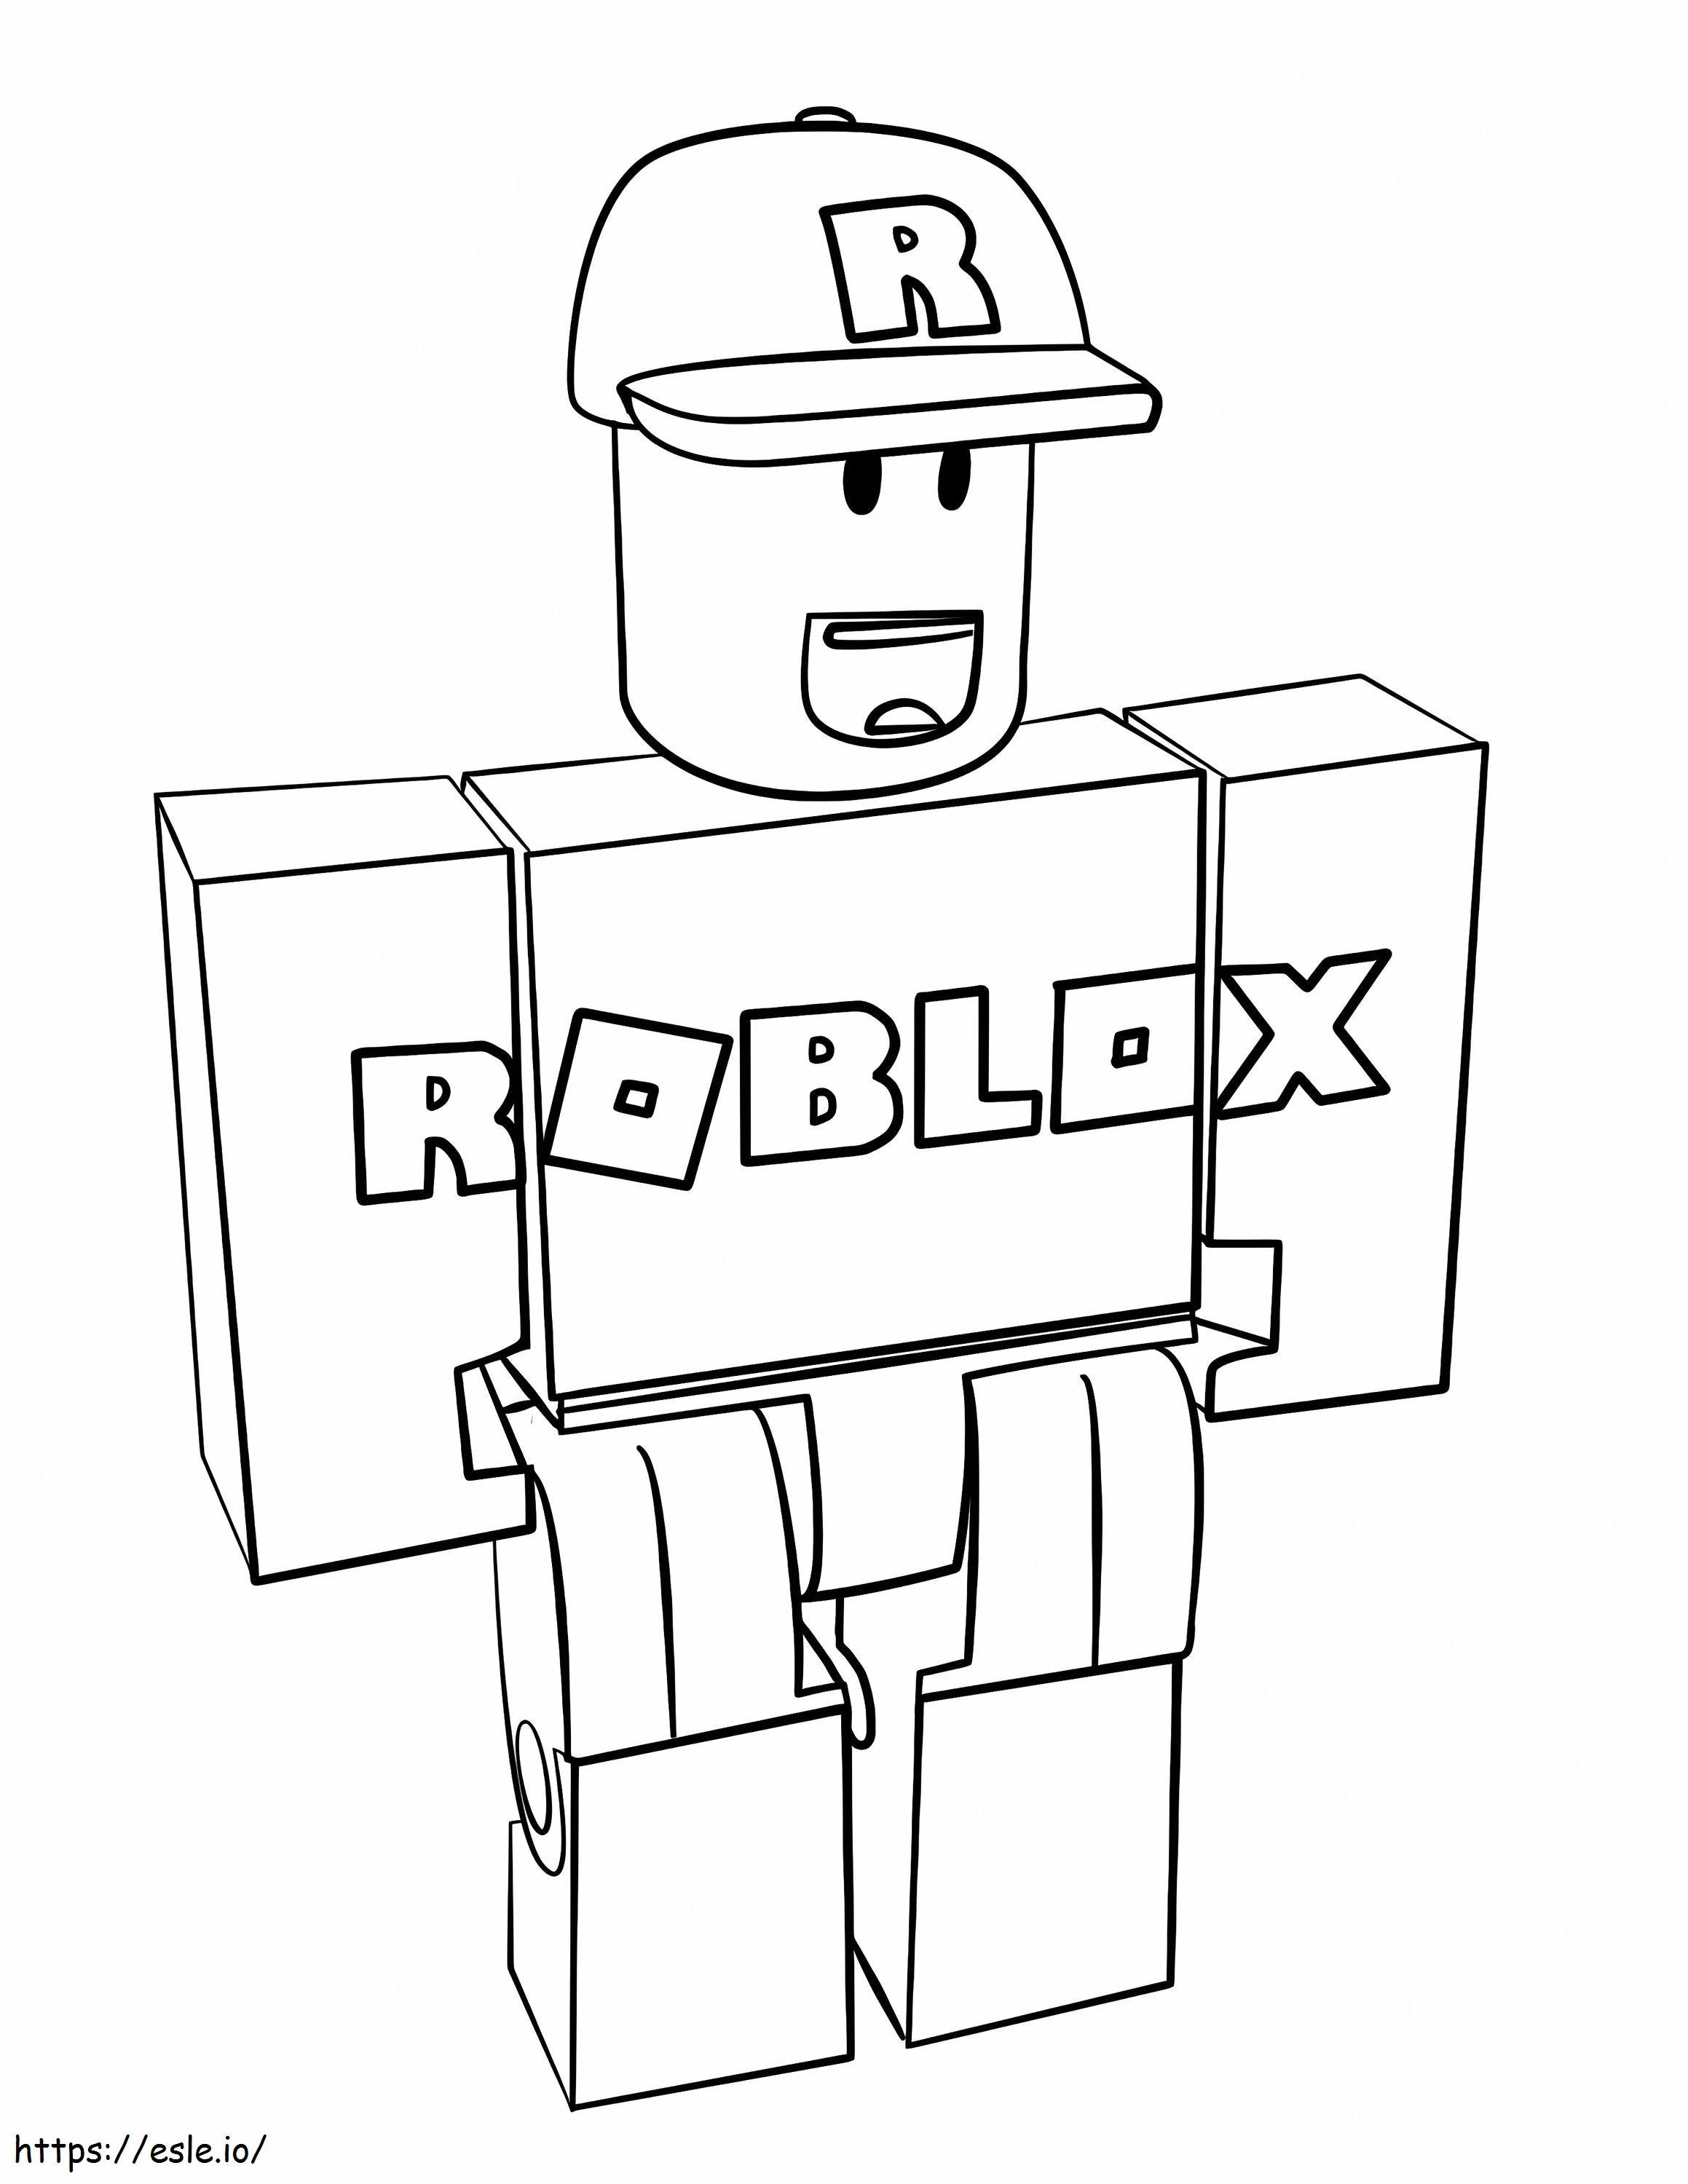 1576223853 Roblox Guest coloring page